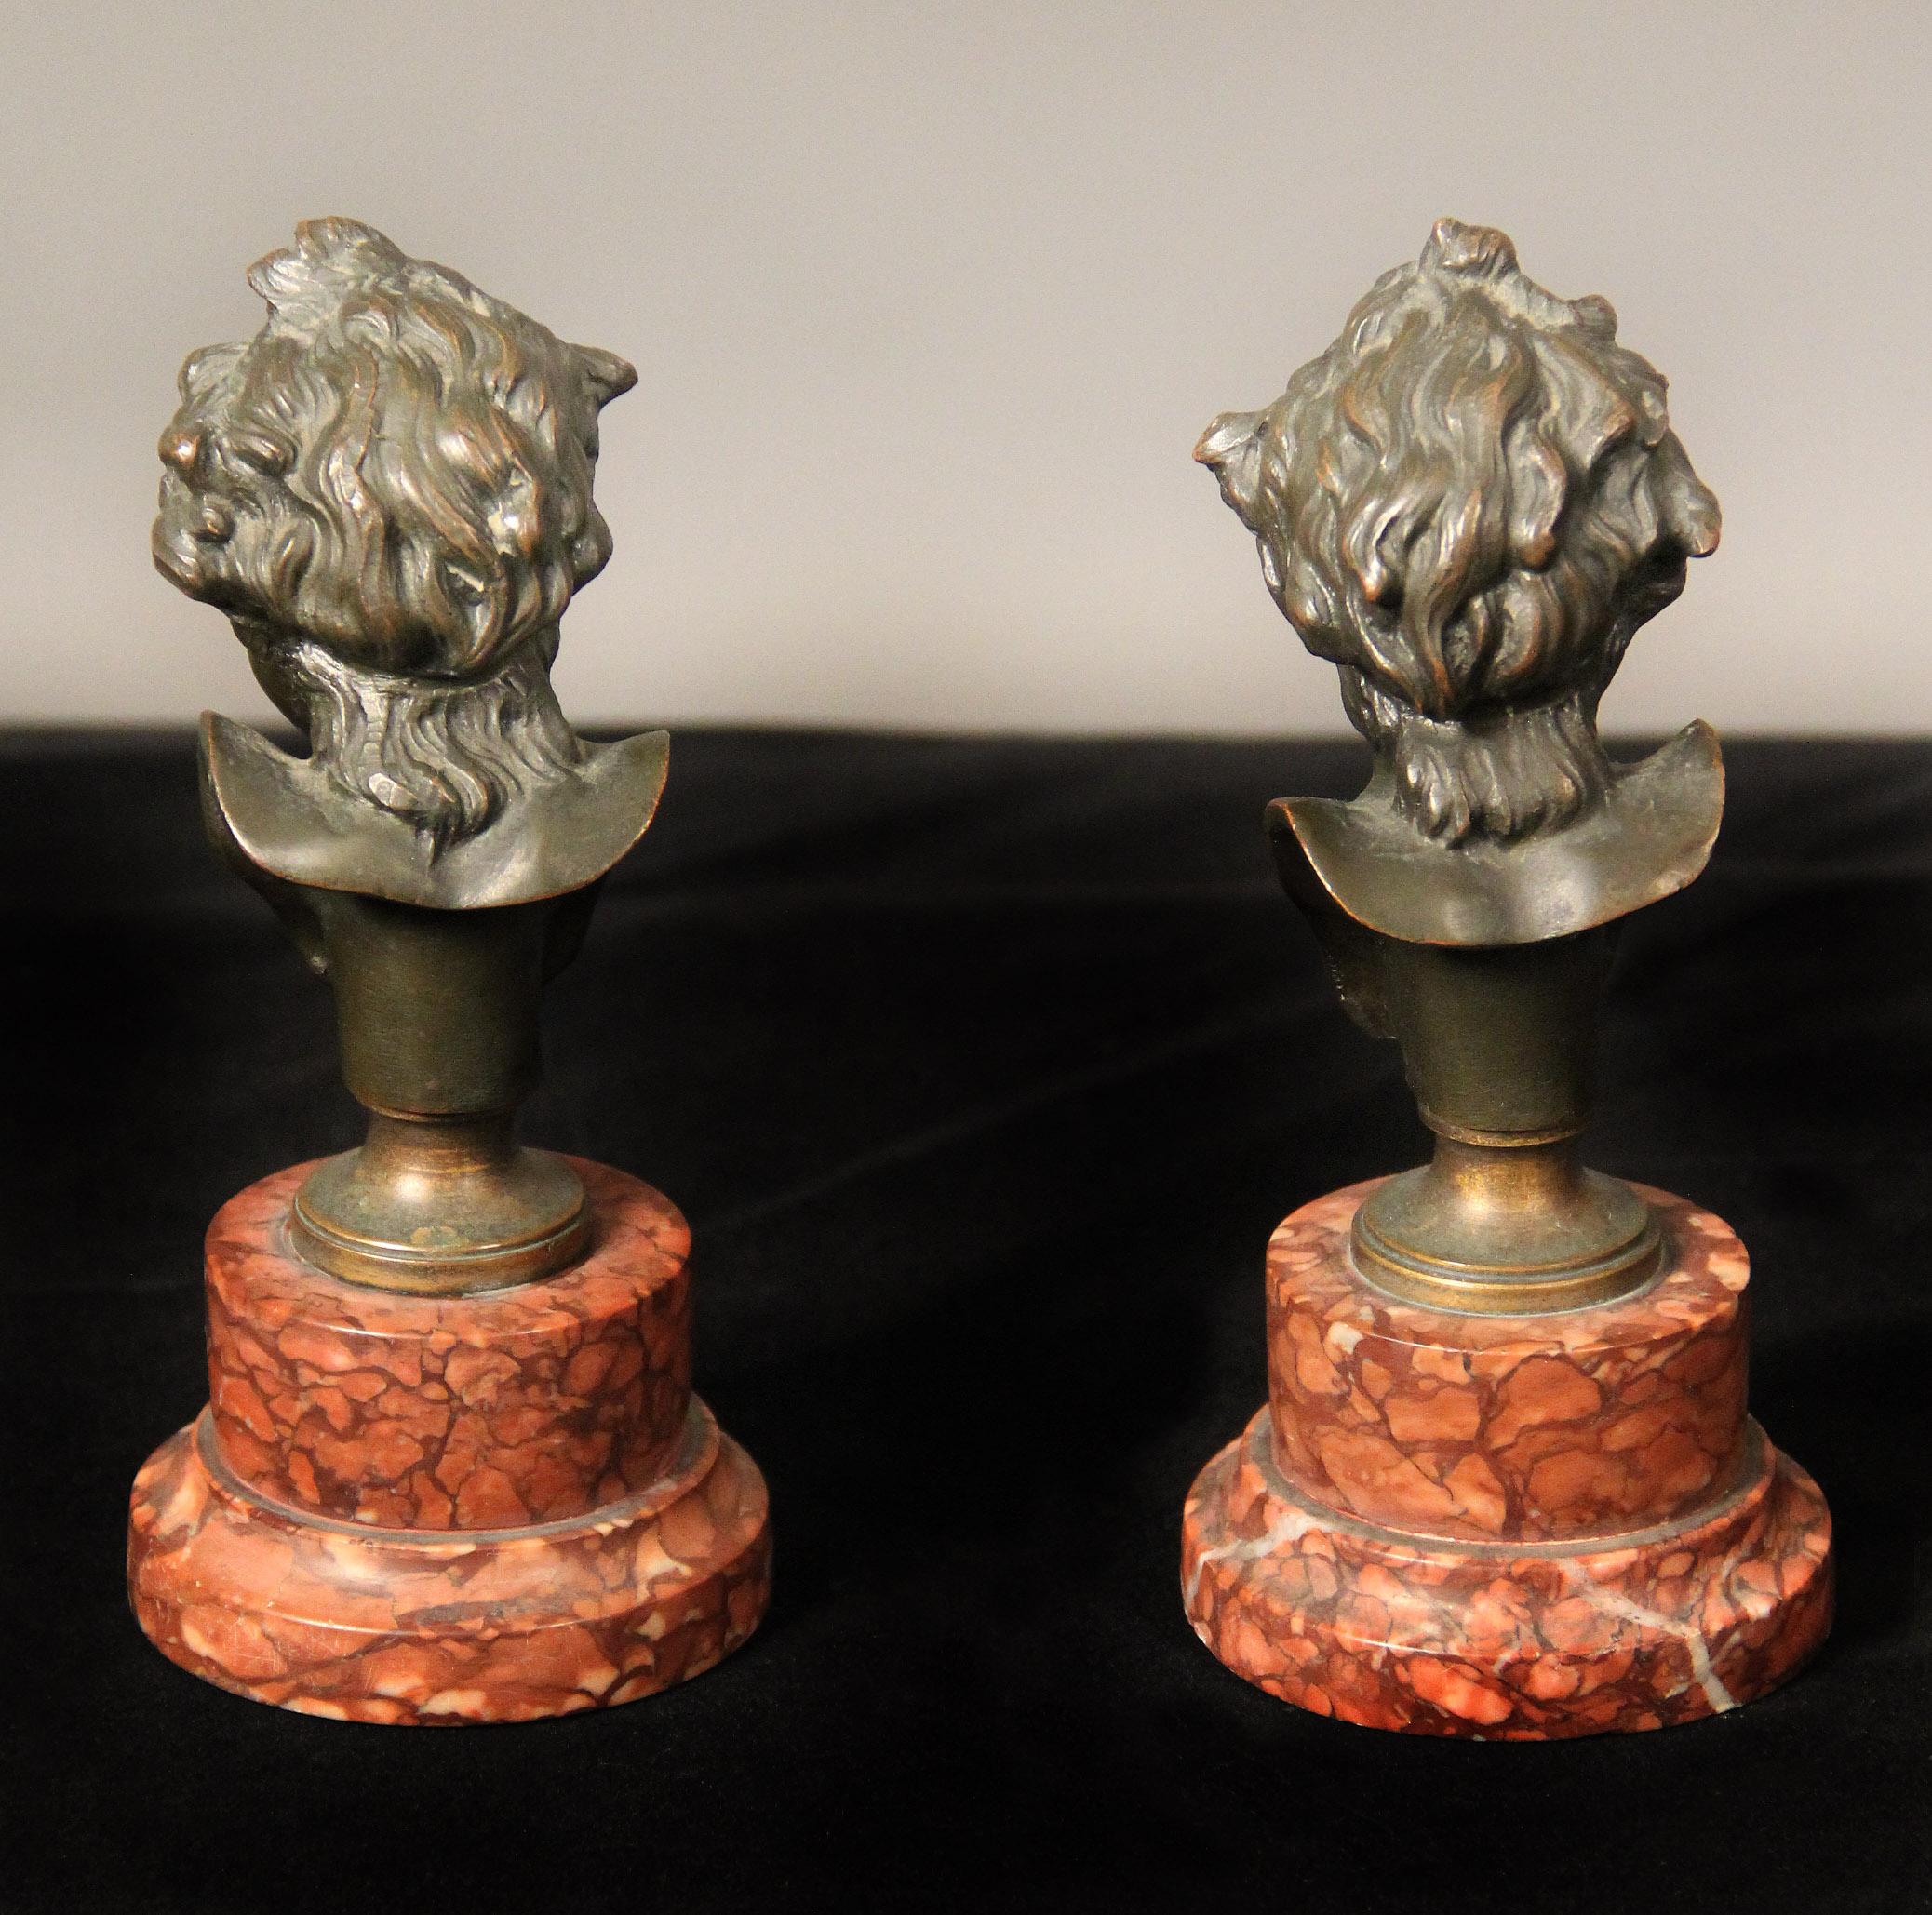 French Pair of Late 19th Century Bronze Busts After Clodion